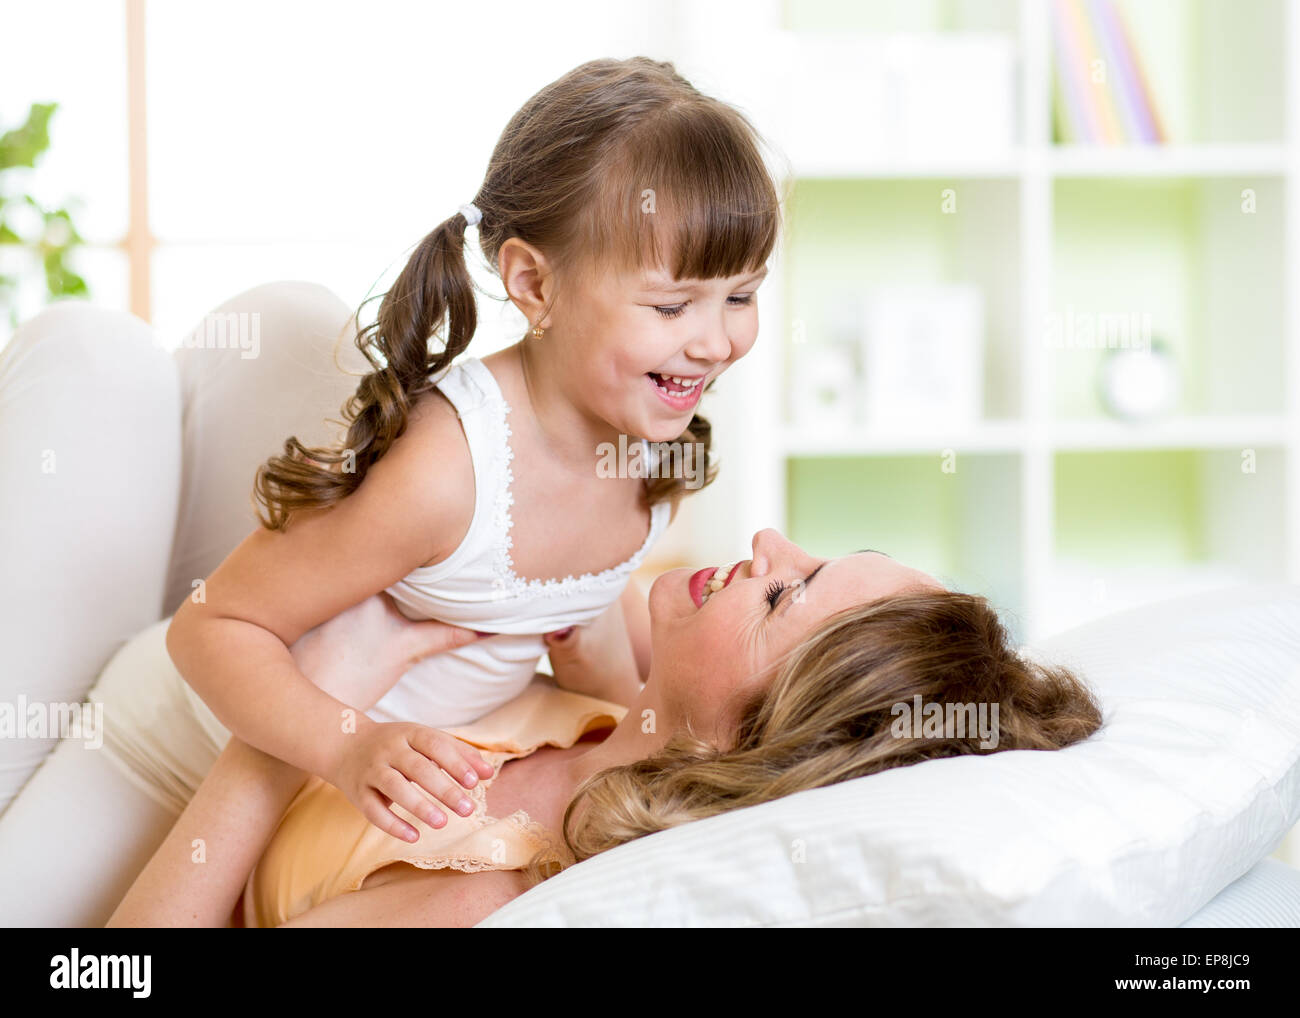 Mom and child having fun in bed Stock Photo